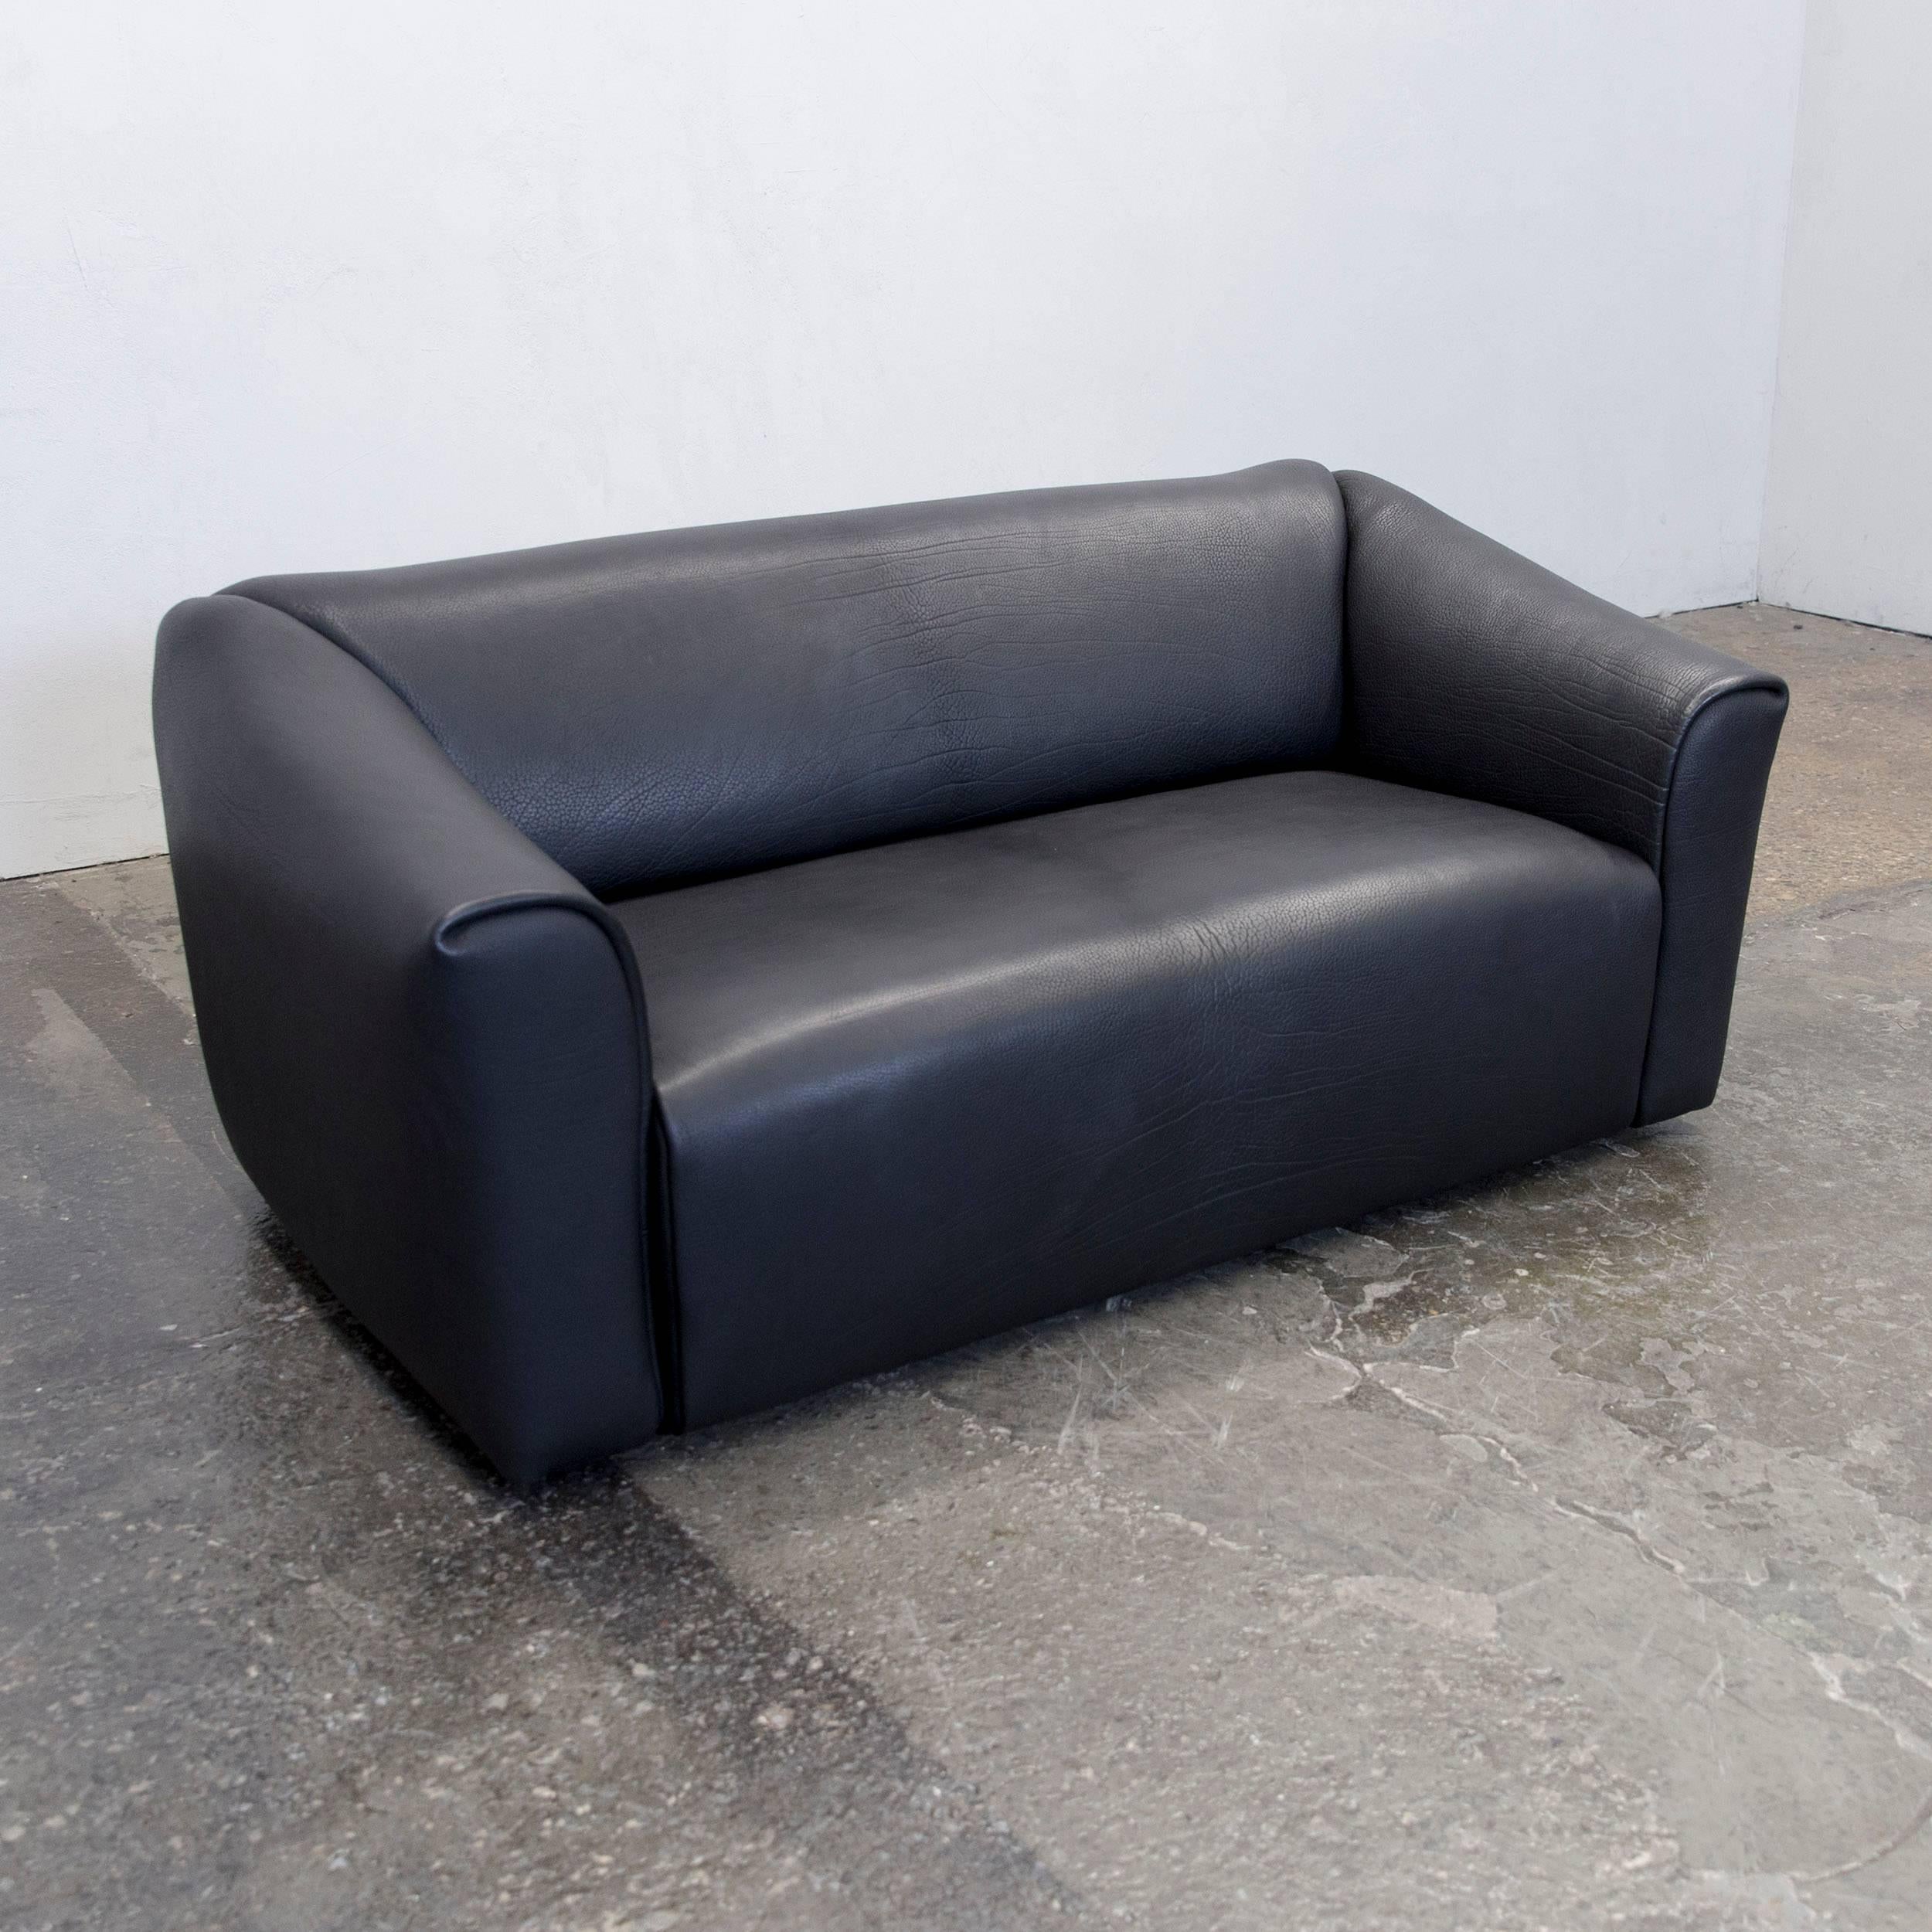 Black colored original De Sede DS 47 designer leather sofa in a minimalistic and modern design, made out of thick neck leather.